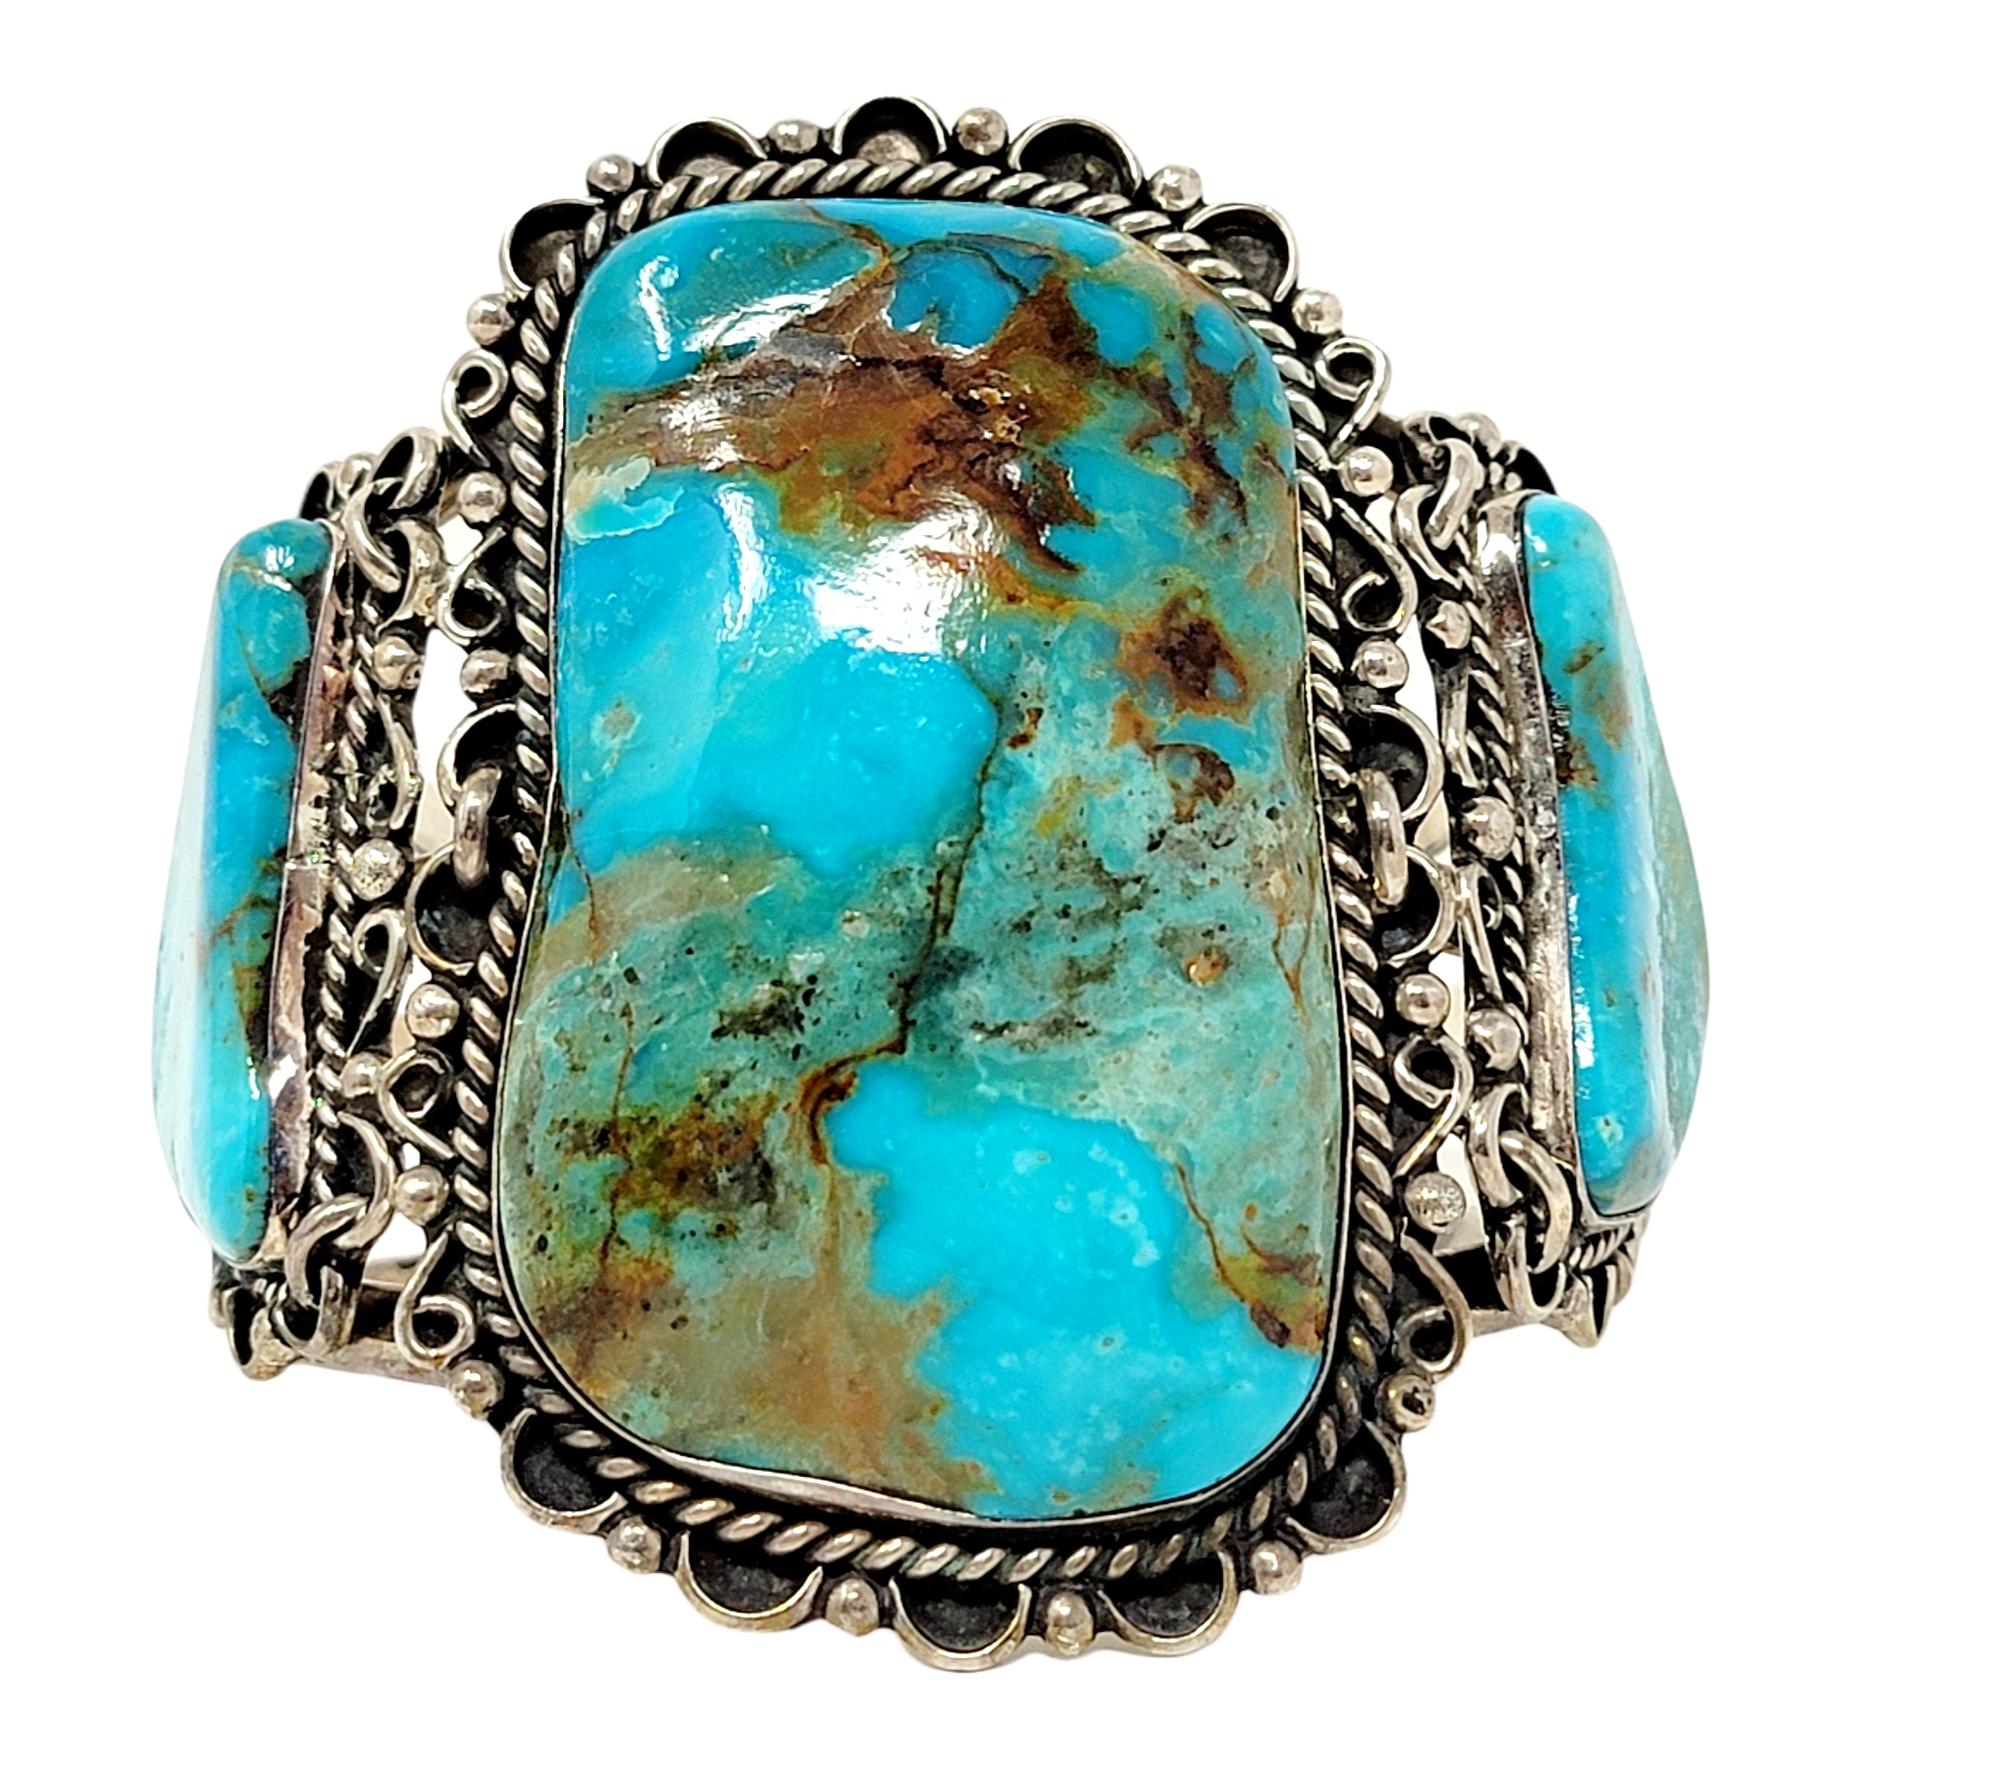 Bold sterling silver and natural turquoise three stone cuff bracelet with detailed metal work. Excellent condition with vintage patina. 

Bracelet type: Cuff
Metal: Sterling Silver
Natural Turquoise: Cabochon
Weight: 113.5 grams
Width: 2.75